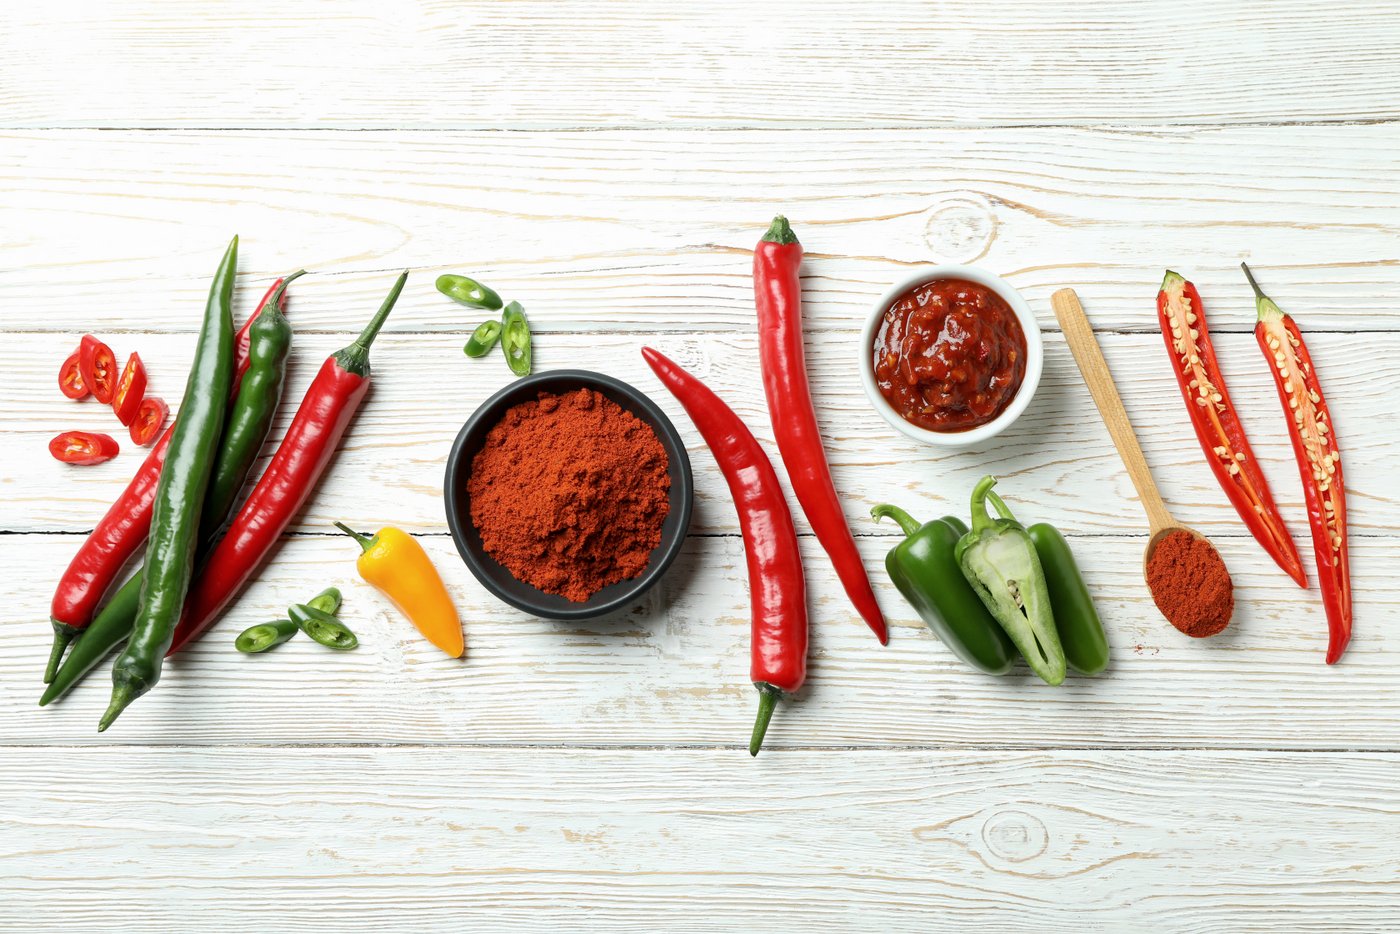 Hot peppers, sauces and powder - Food seasoning and spices